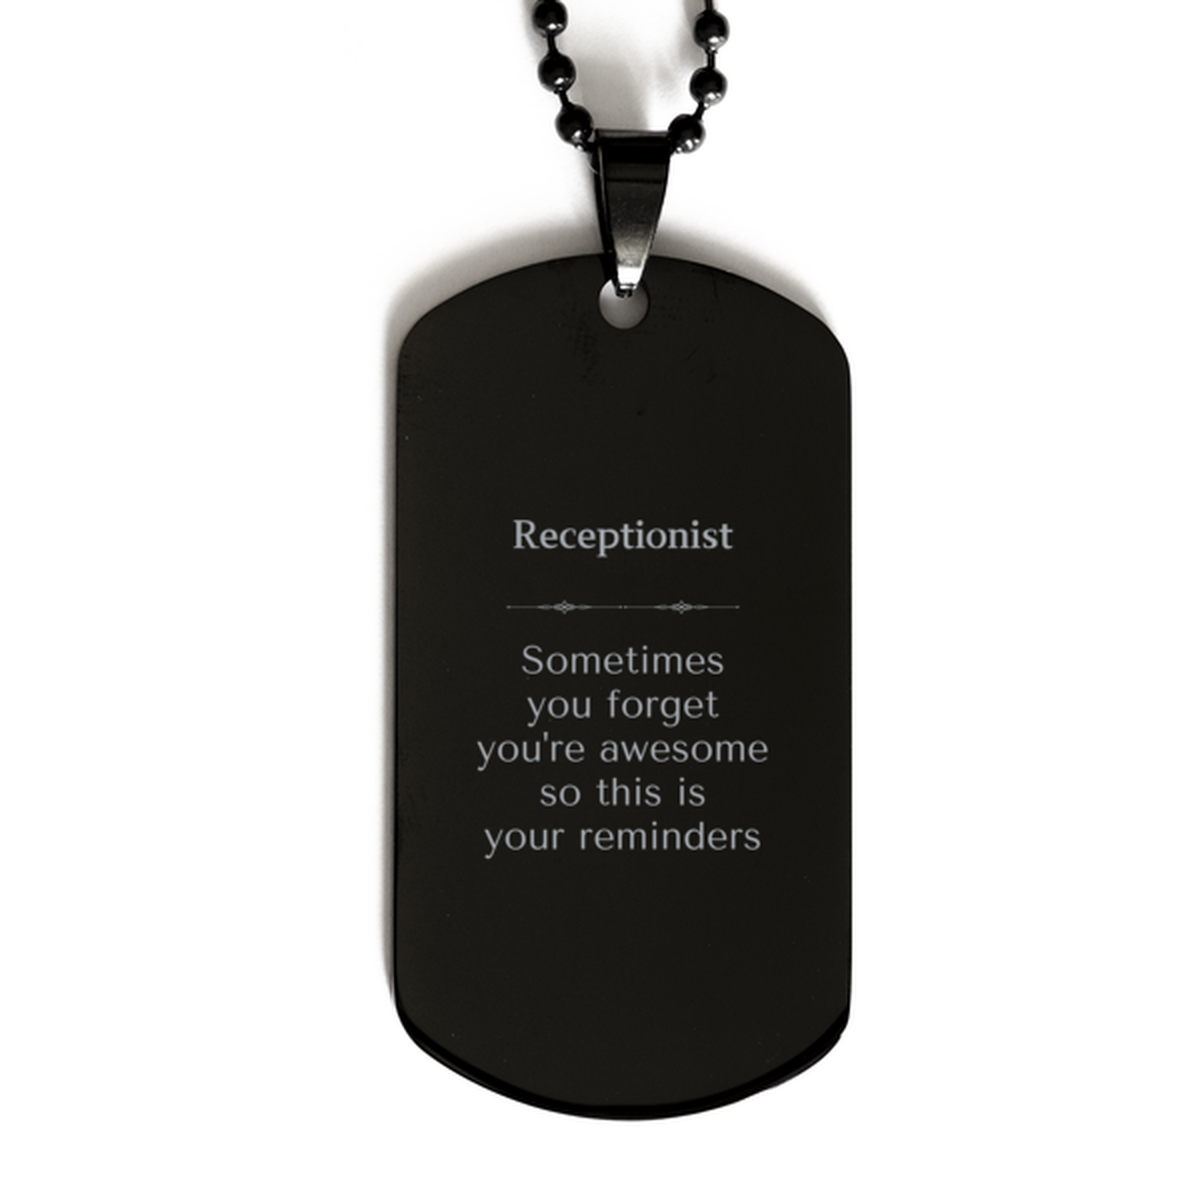 Sentimental Receptionist Black Dog Tag, Receptionist Sometimes you forget you're awesome so this is your reminders, Graduation Christmas Birthday Gifts for Receptionist, Men, Women, Coworkers